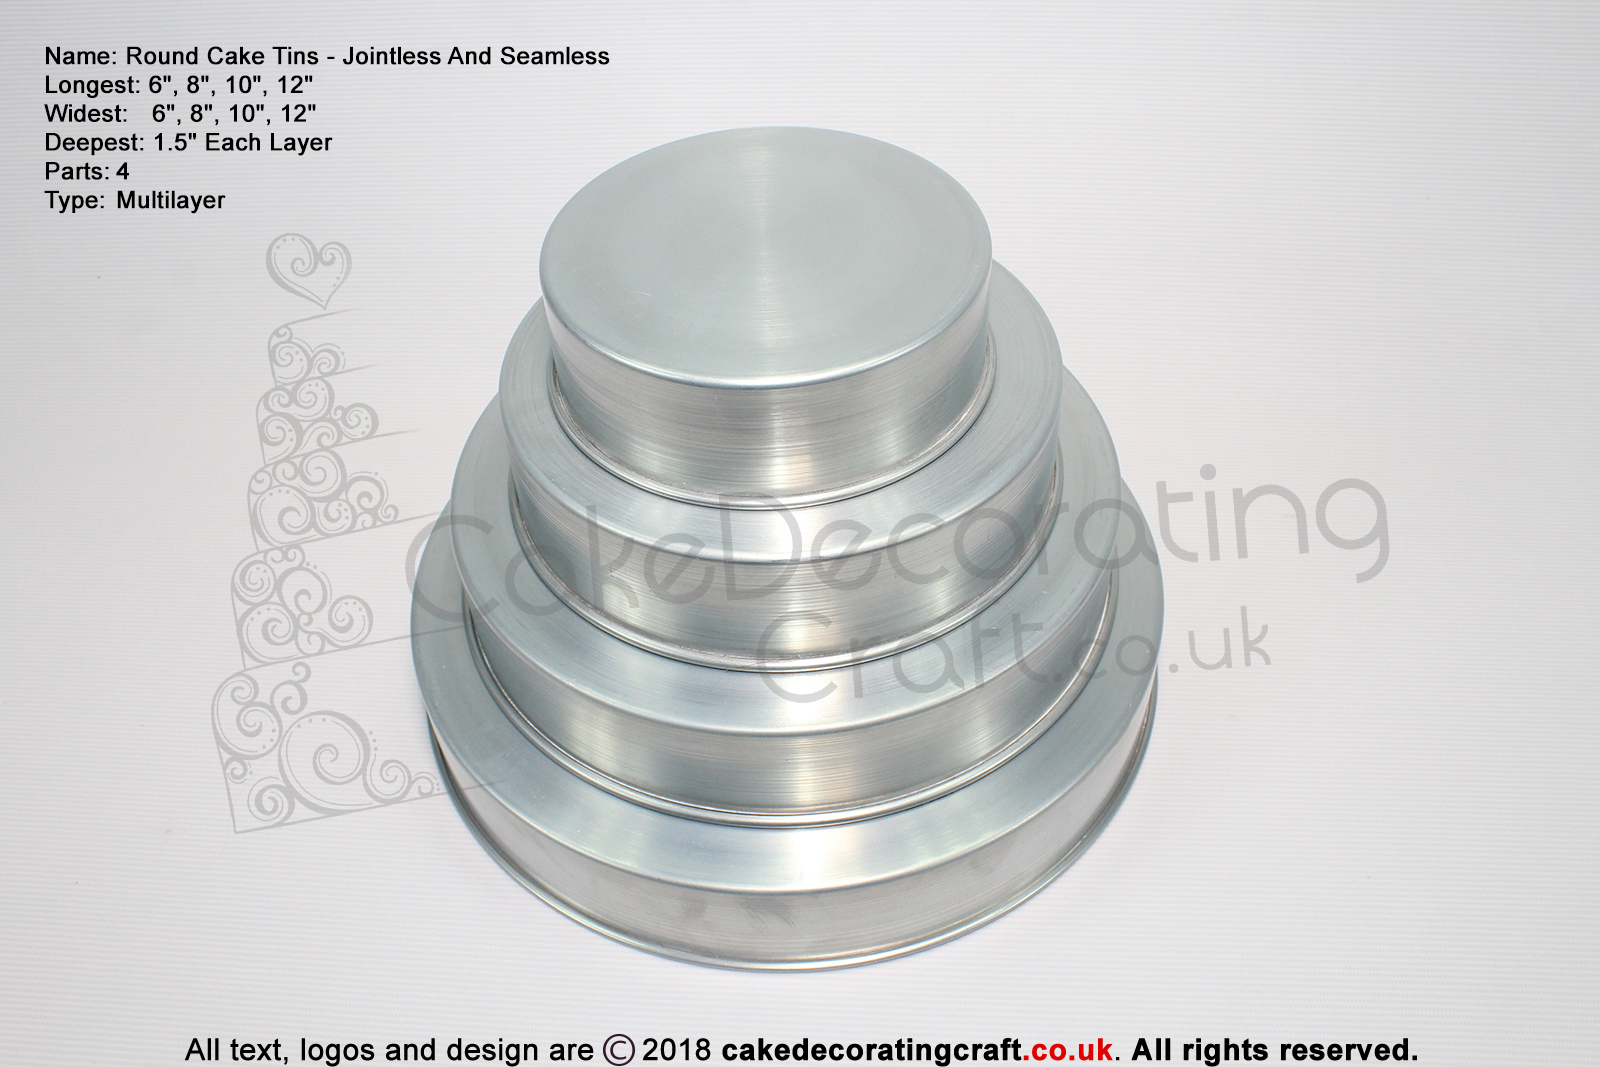 Round Cake Baking Tin | 1.5" Deep | Size 6 8 10 12 " | 4 Tiers | Jointless And Seamless | Rainbow Multi Layer